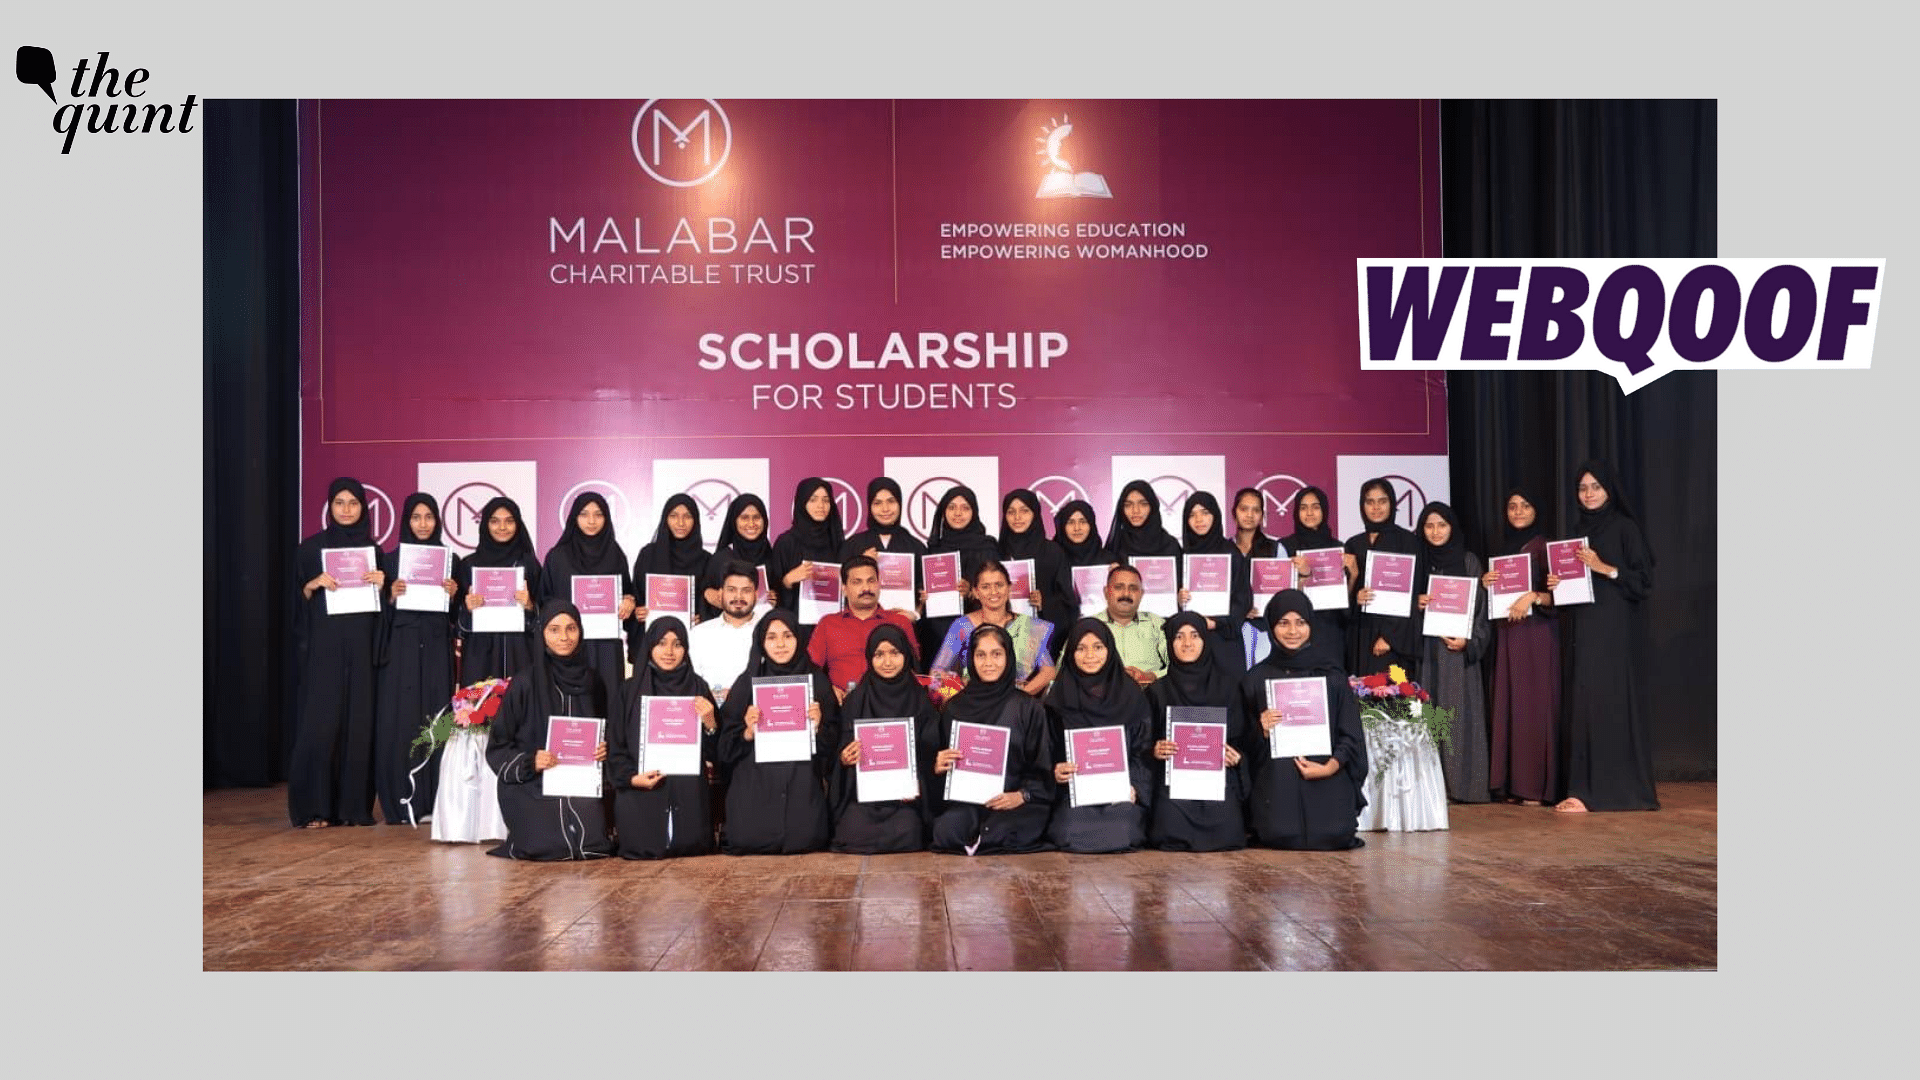 <div class="paragraphs"><p>The photo shows an event where the Malabar charitable trust awarded scholarships to girls.</p></div>